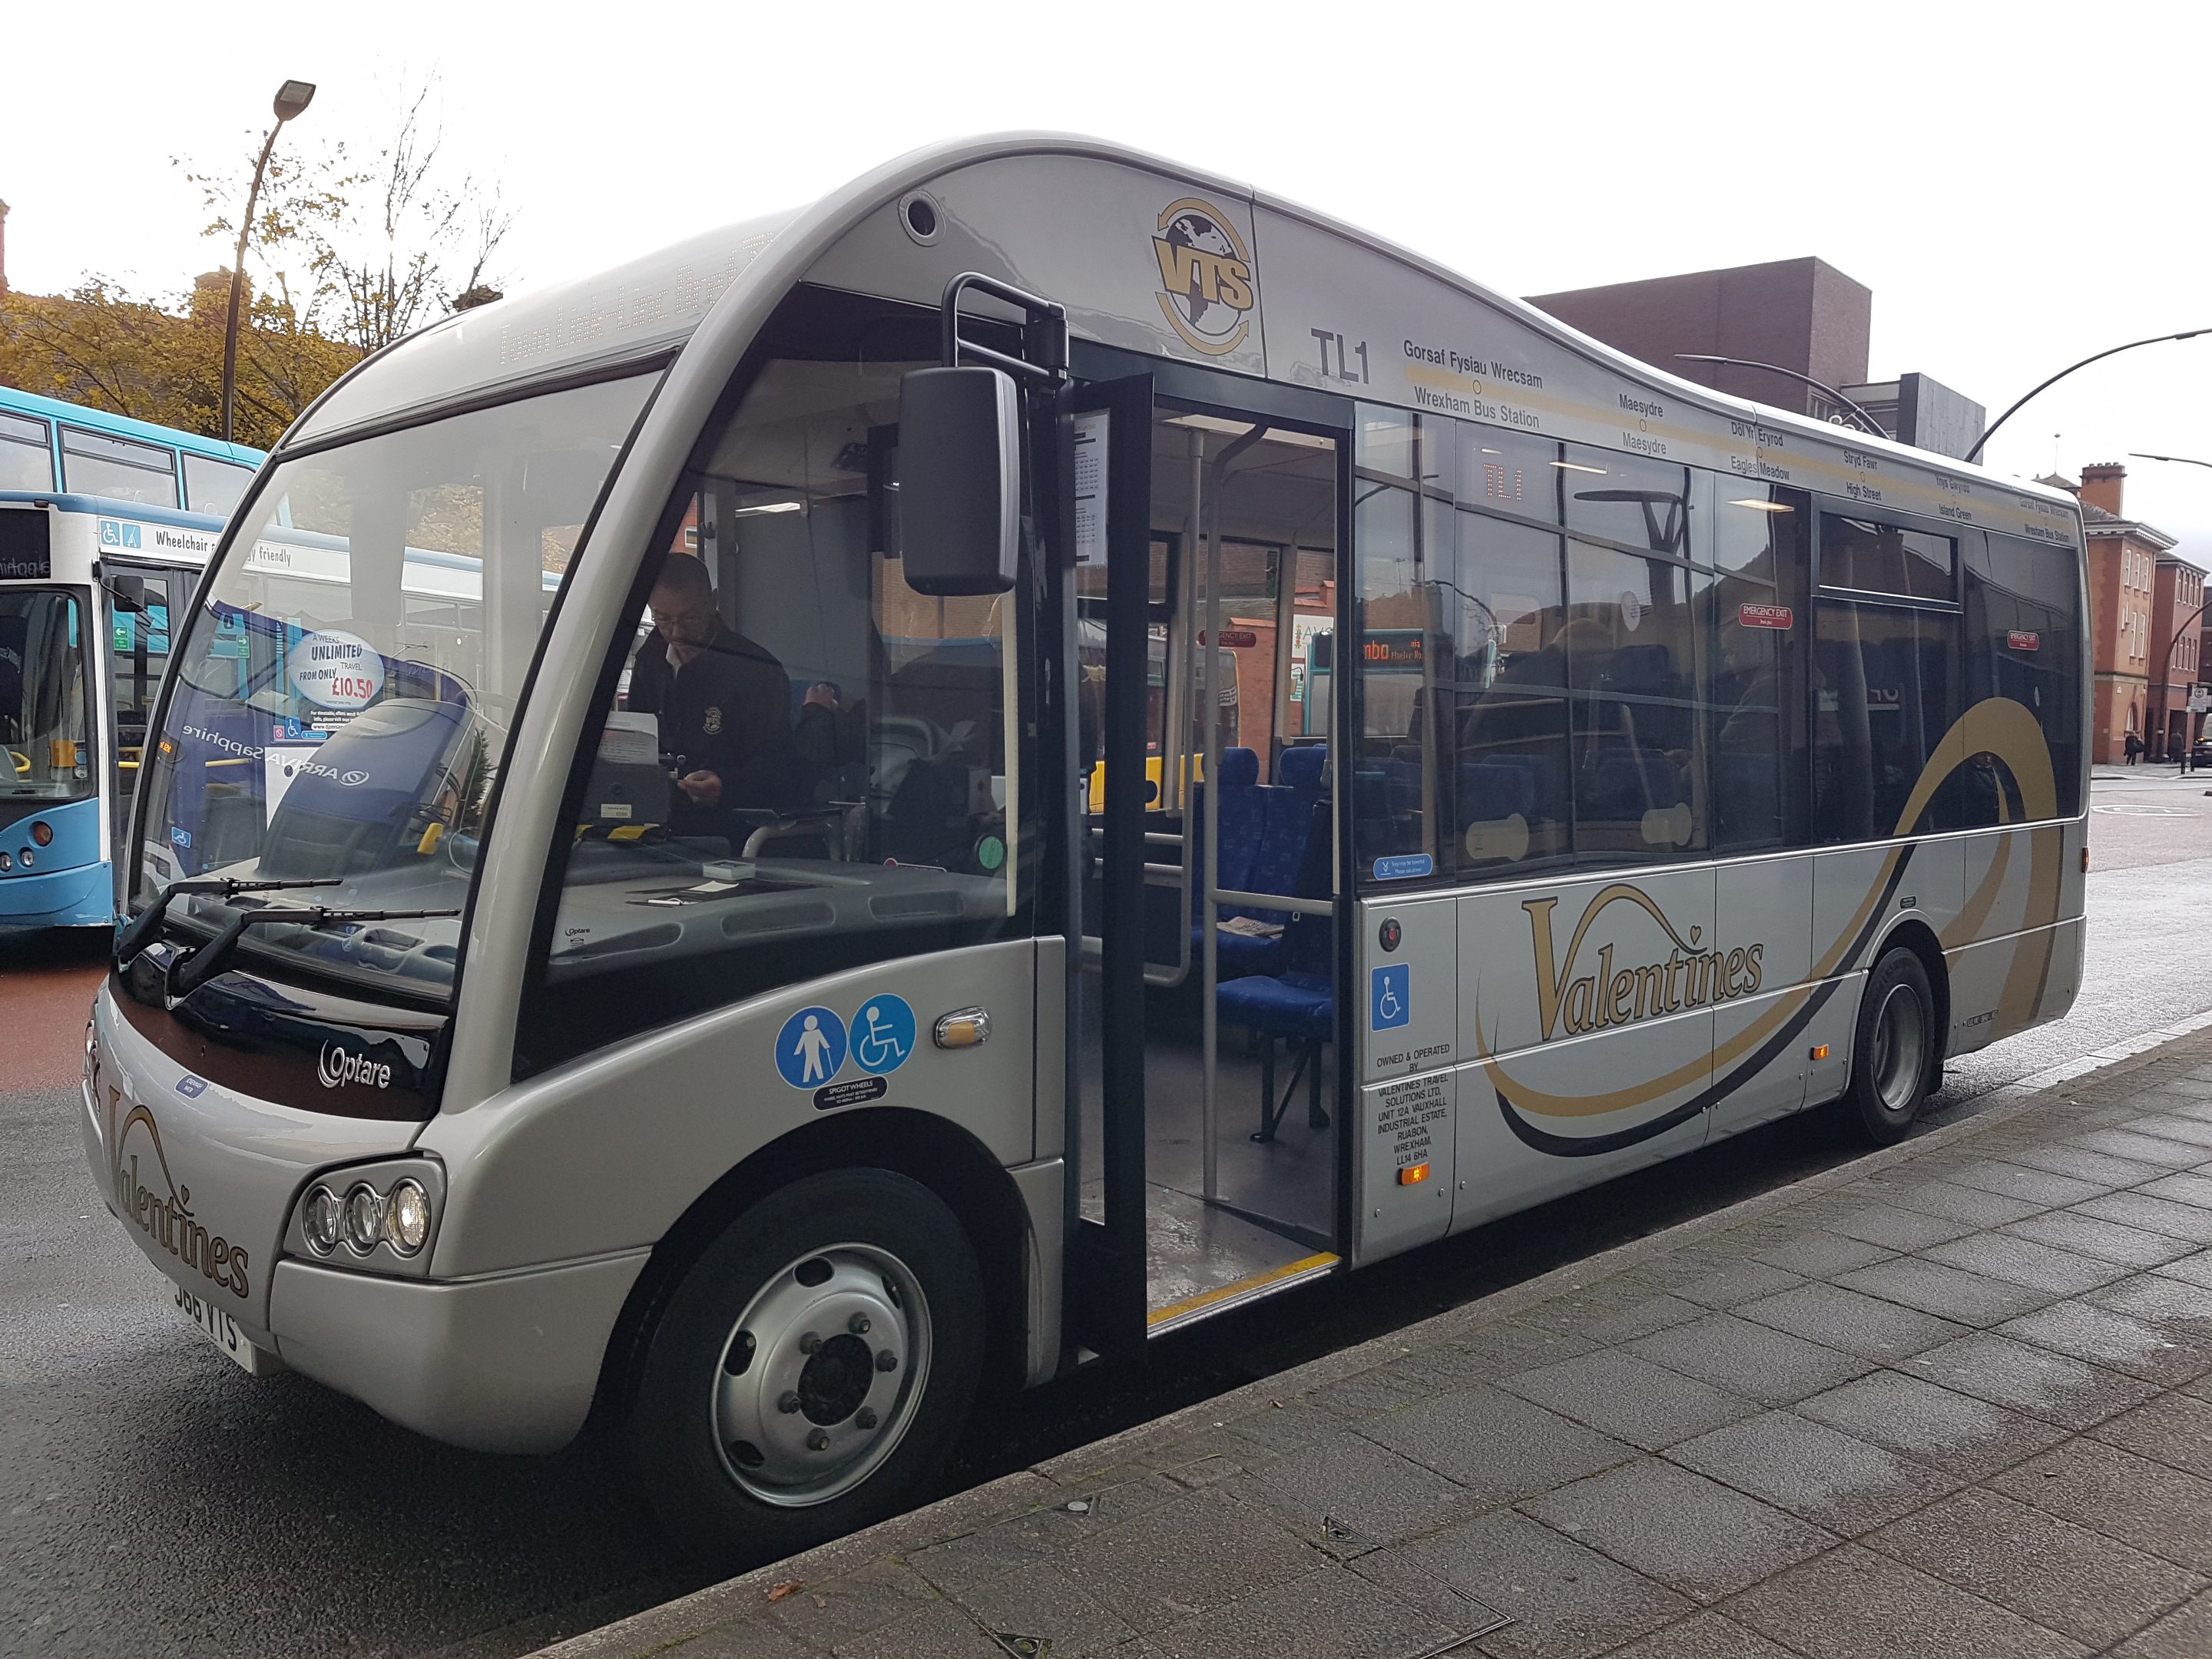 Are you taking advantage of the new town link bus service?